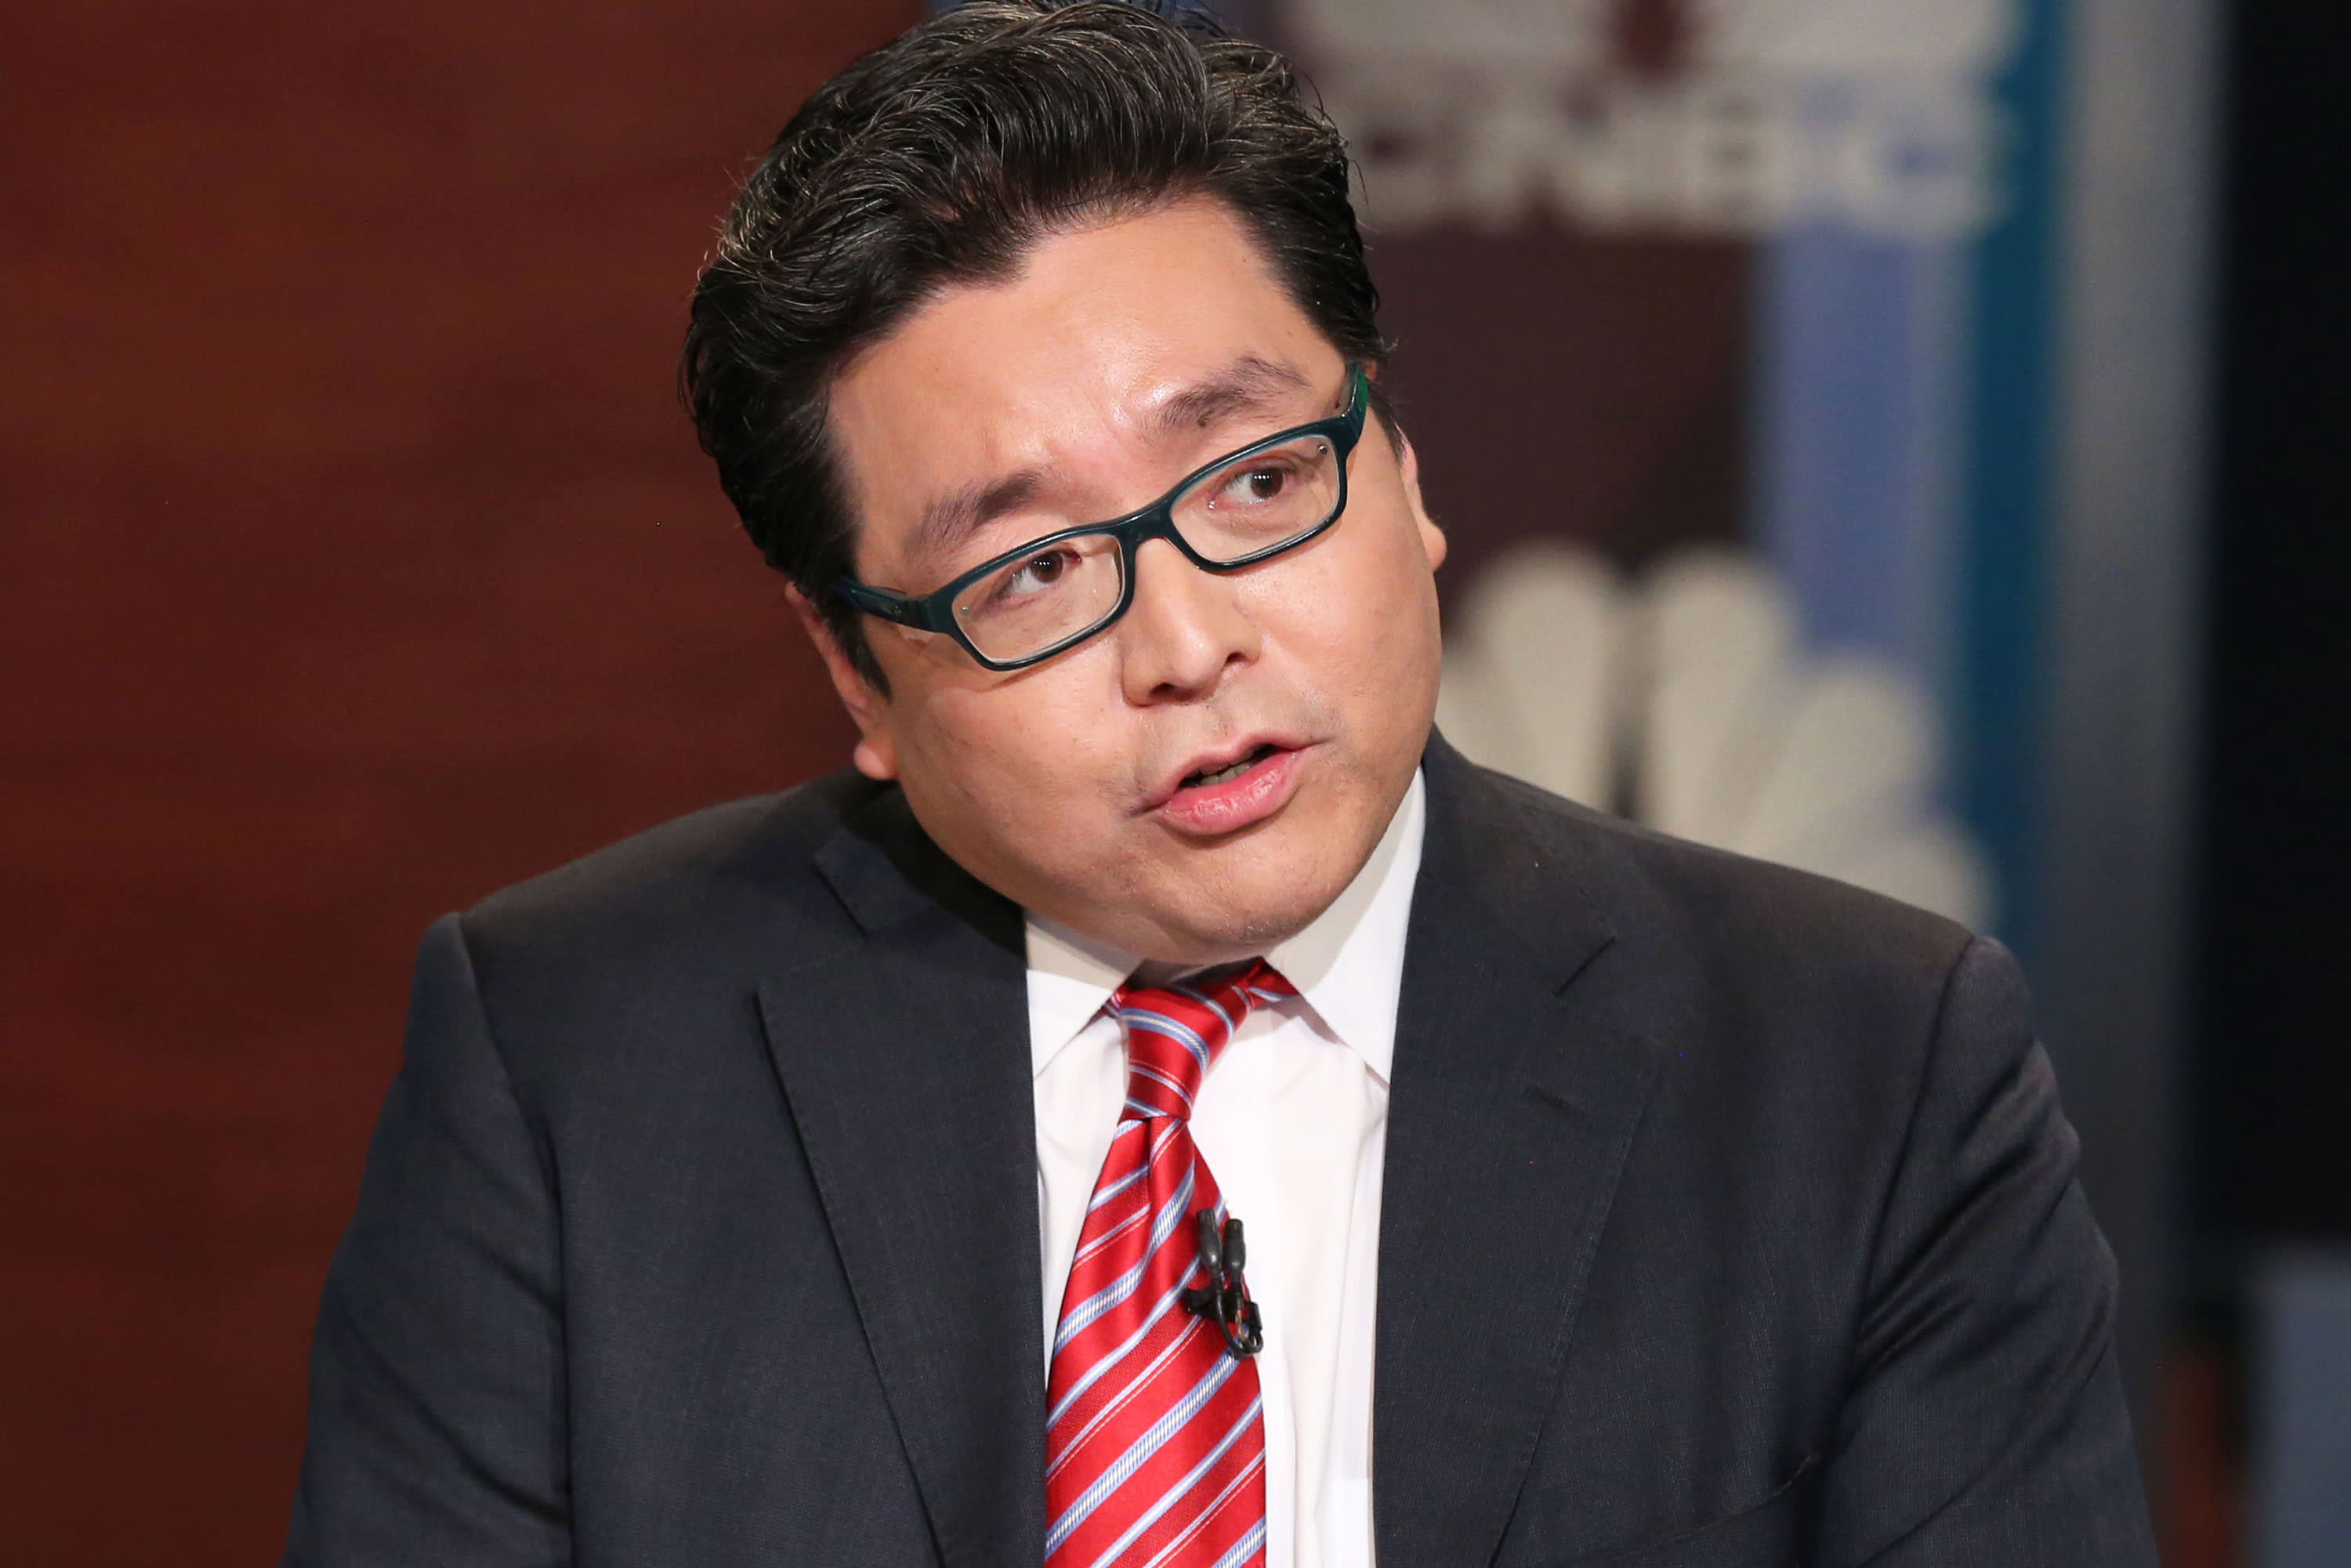 Tom Lee still betting on cyclicals, sees some overreaction in sell-off